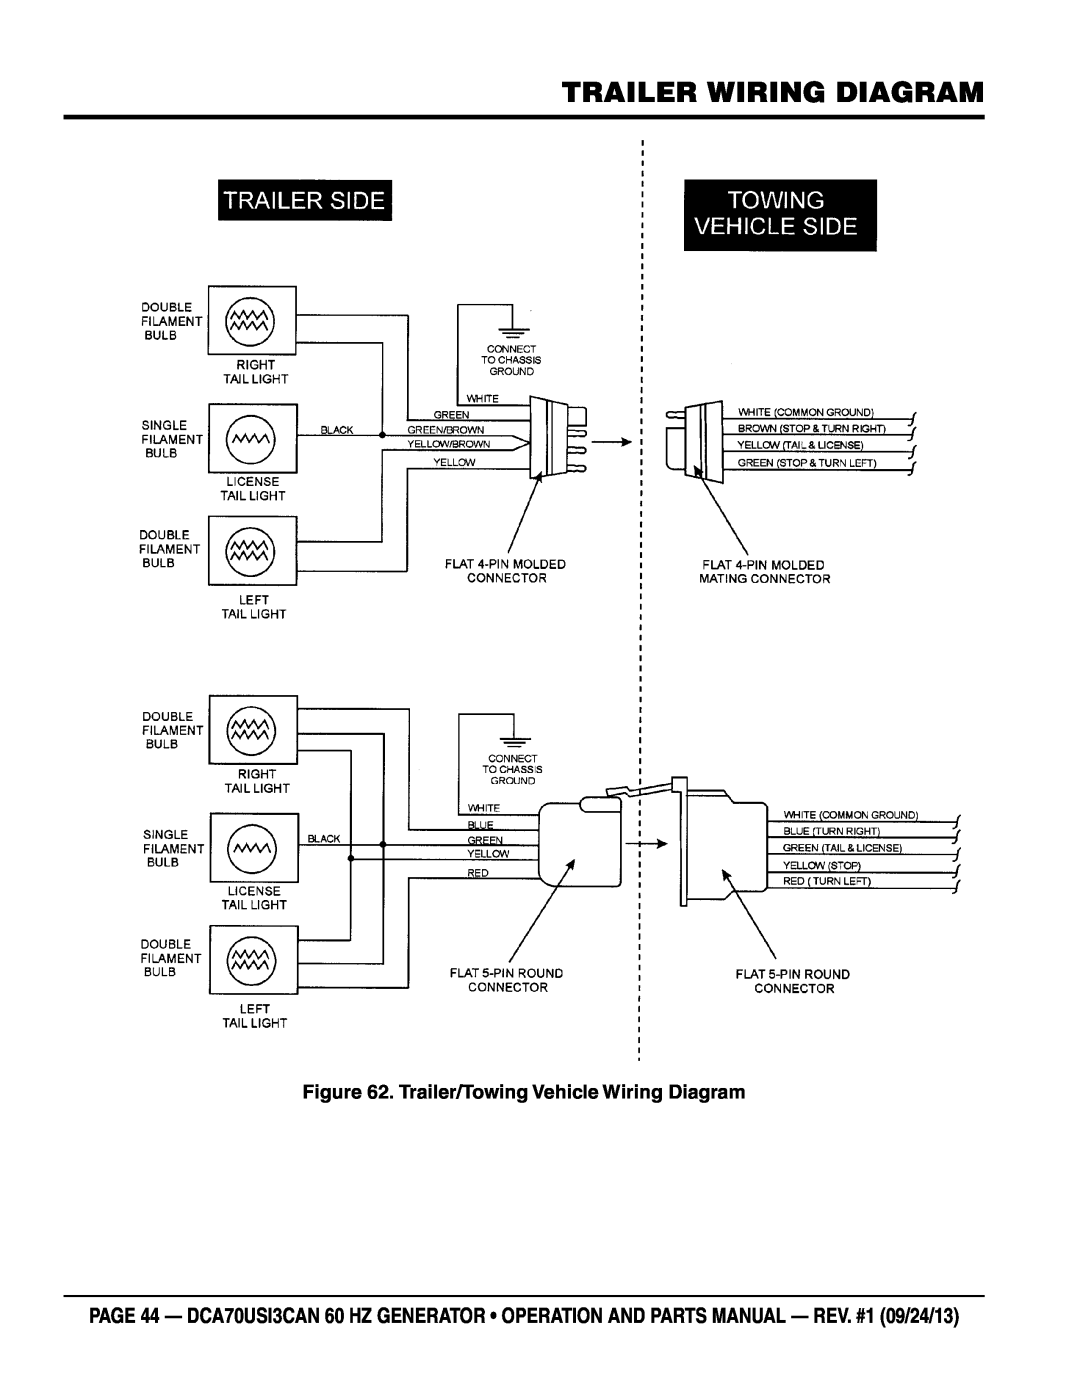 Multiquip DCA70US13CAN manual Trailer Wiring Diagram, Trailer/Towing Vehicle Wiring Diagram 